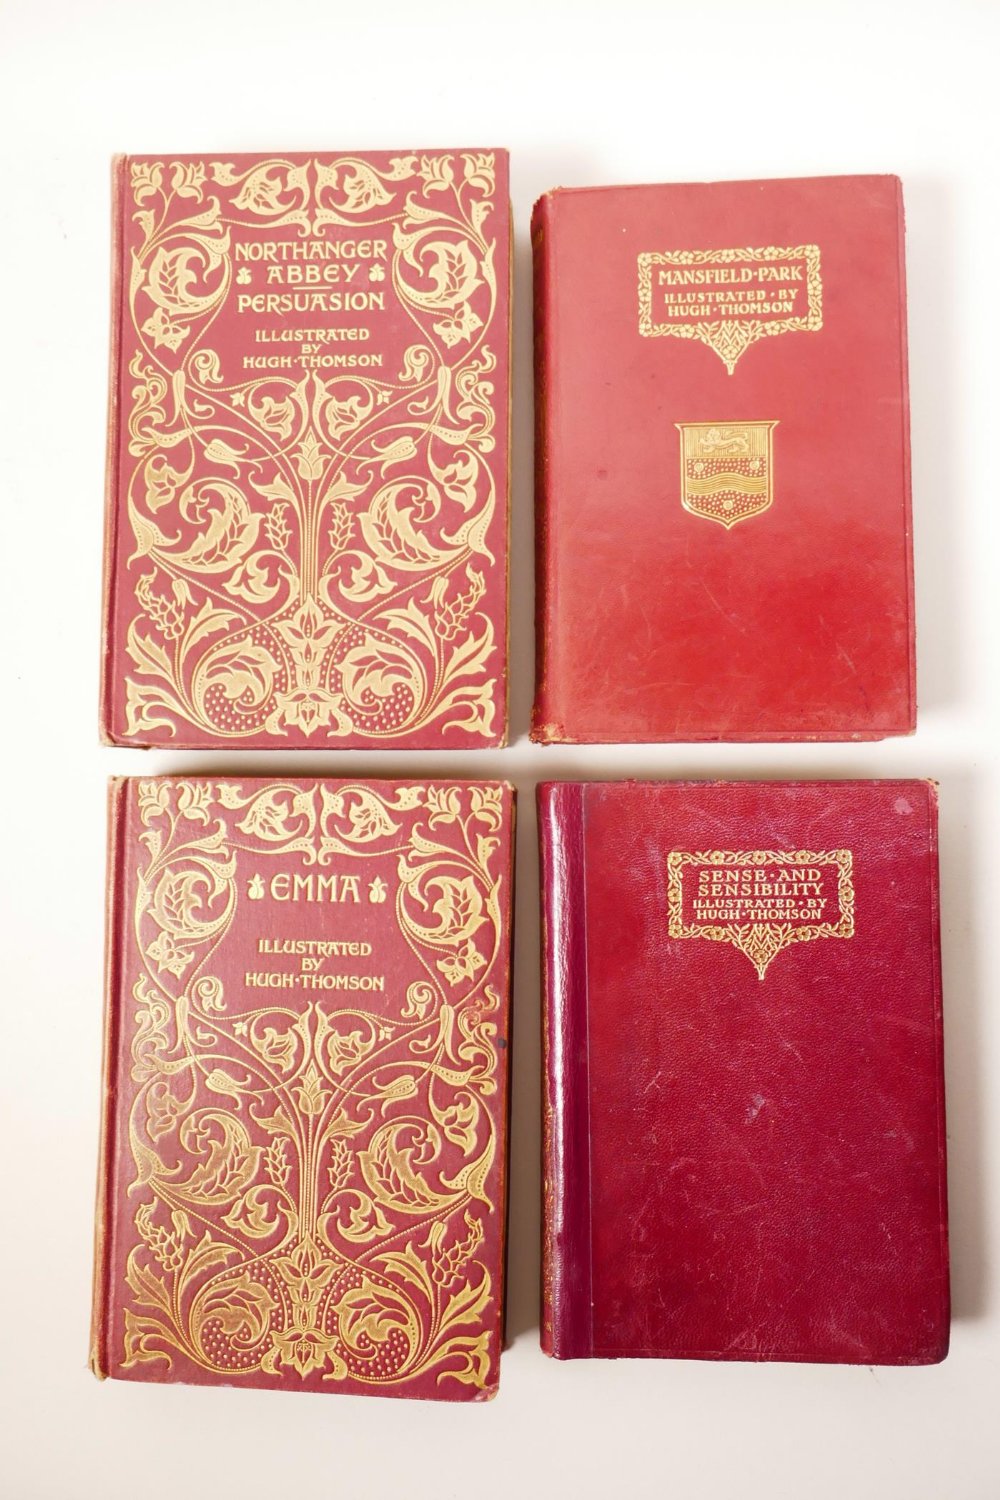 Of Jane Austen interest: Two volumes of the Peacock Edition of Jane Austen, (1775-1817), '